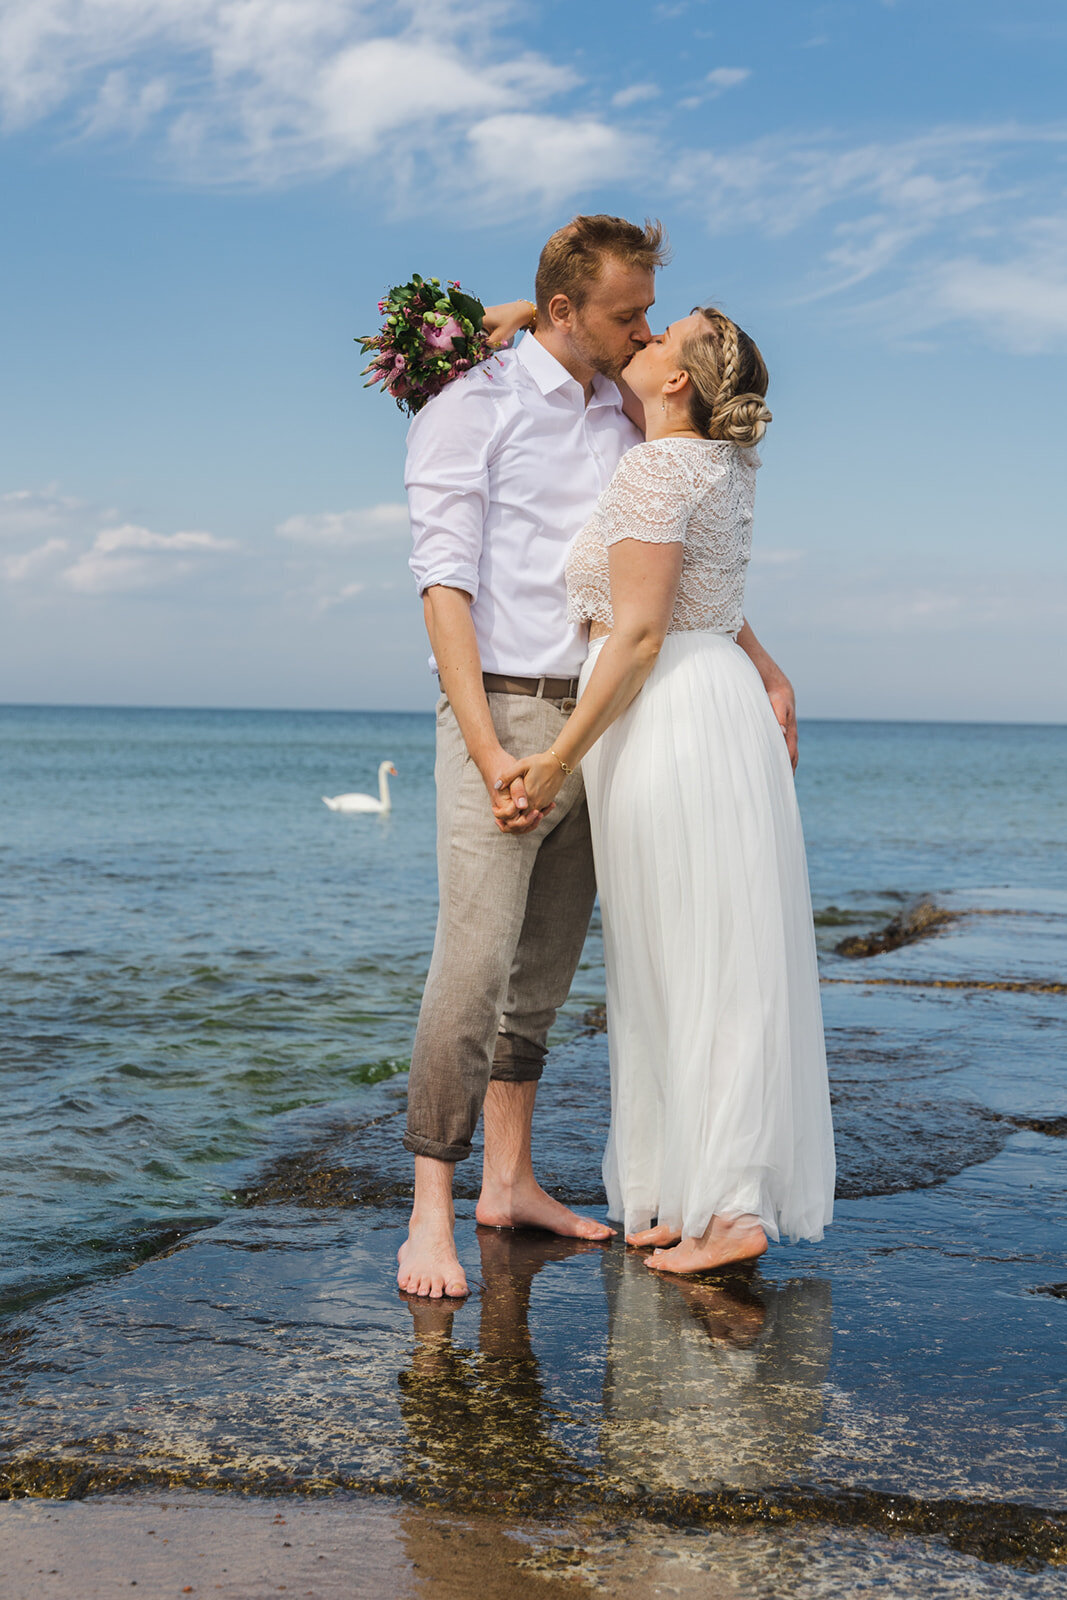 A bride and groom embracing at the beautiful Bornholm Island, a stunning wedding destination, after booking their elopement package for two